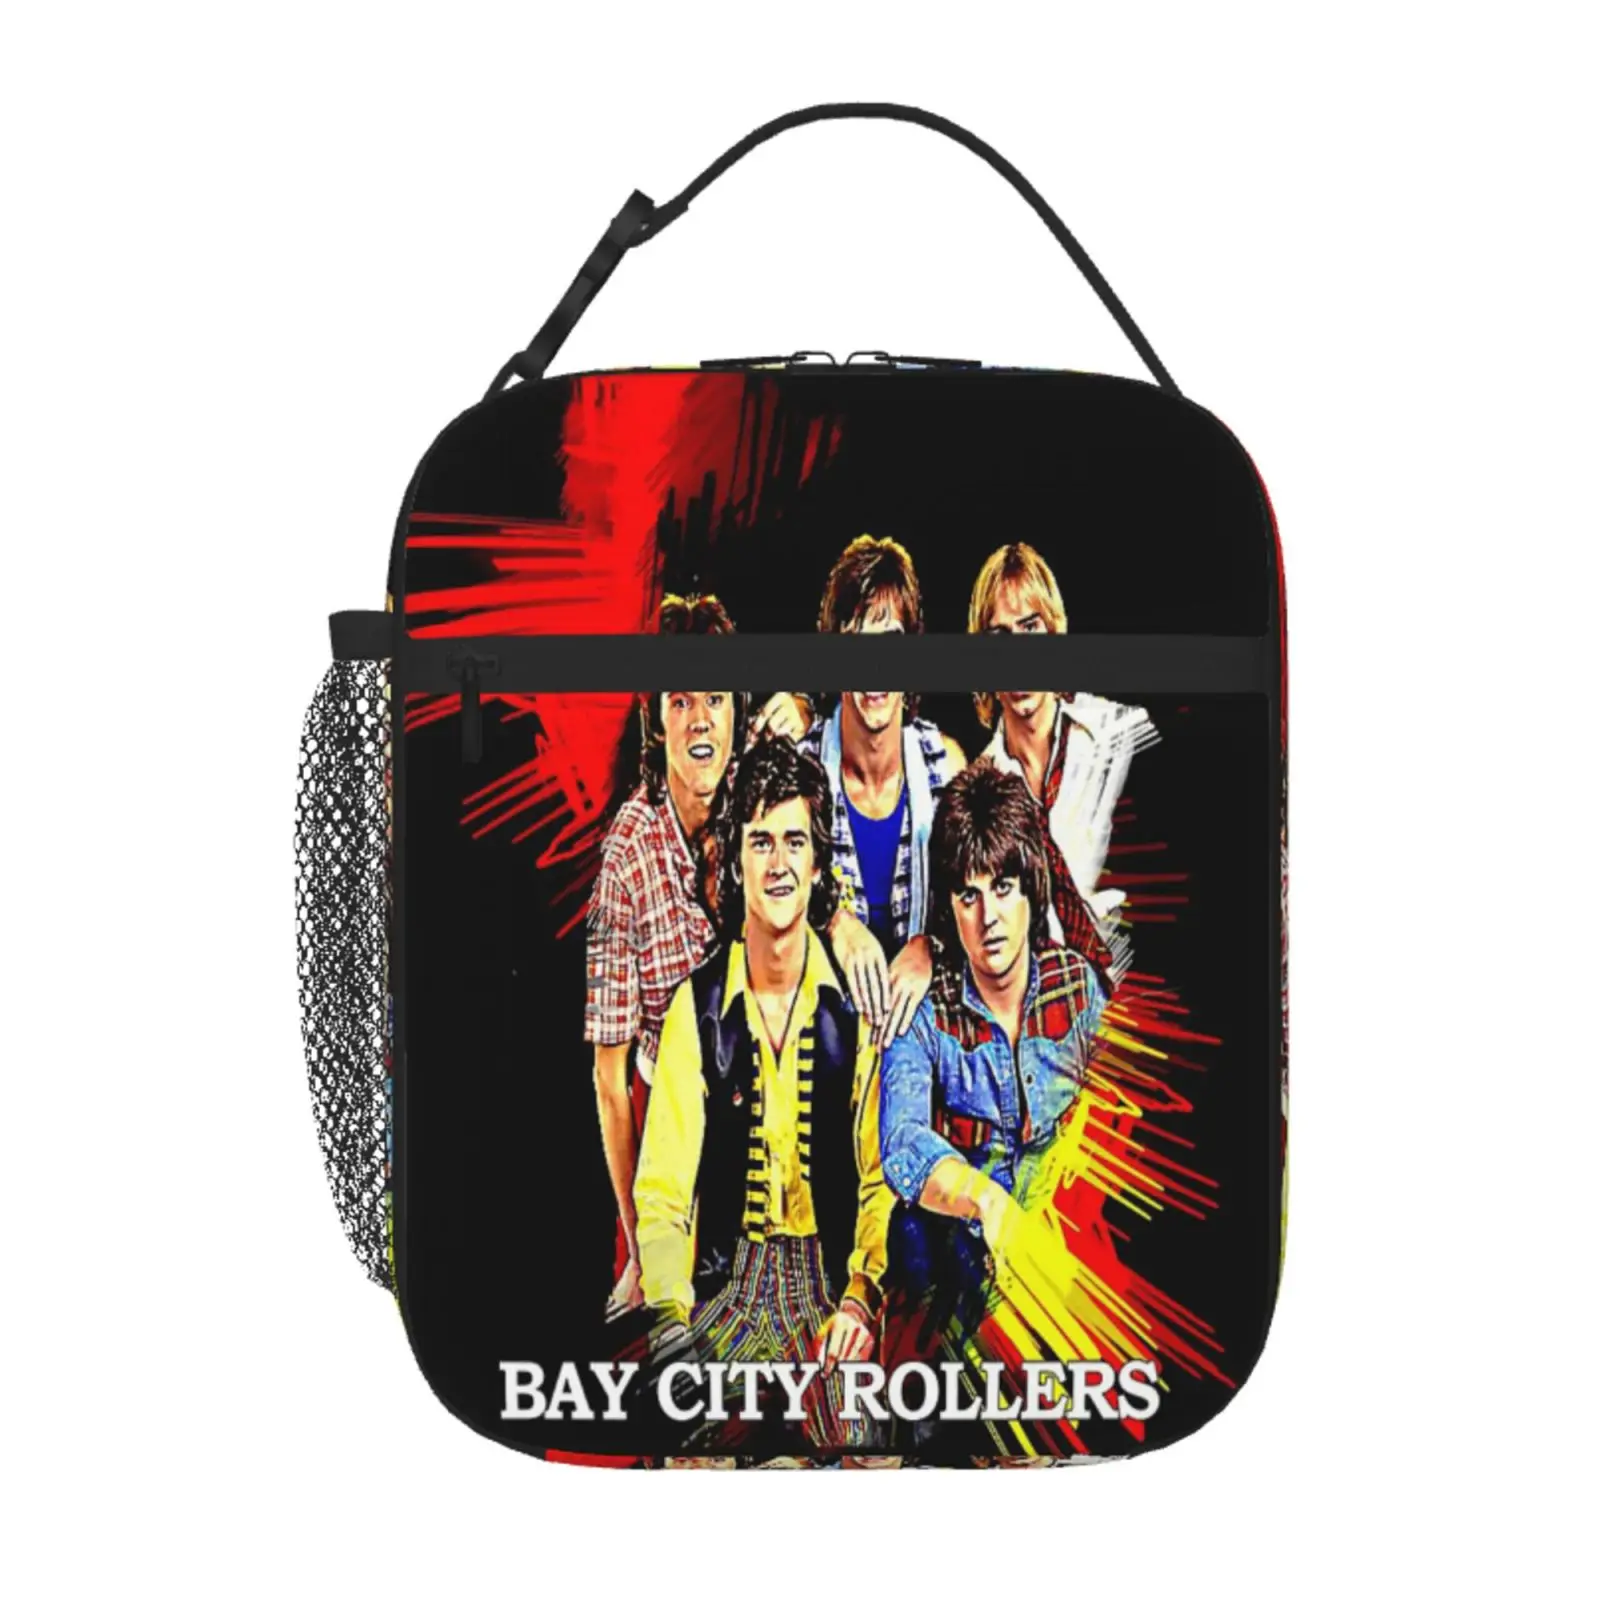 

Bay City Rollers Merchandise Insulated Lunch Box Thermo Container Thermal Fridge Bag Lunchbox Bag Kawaii Bag